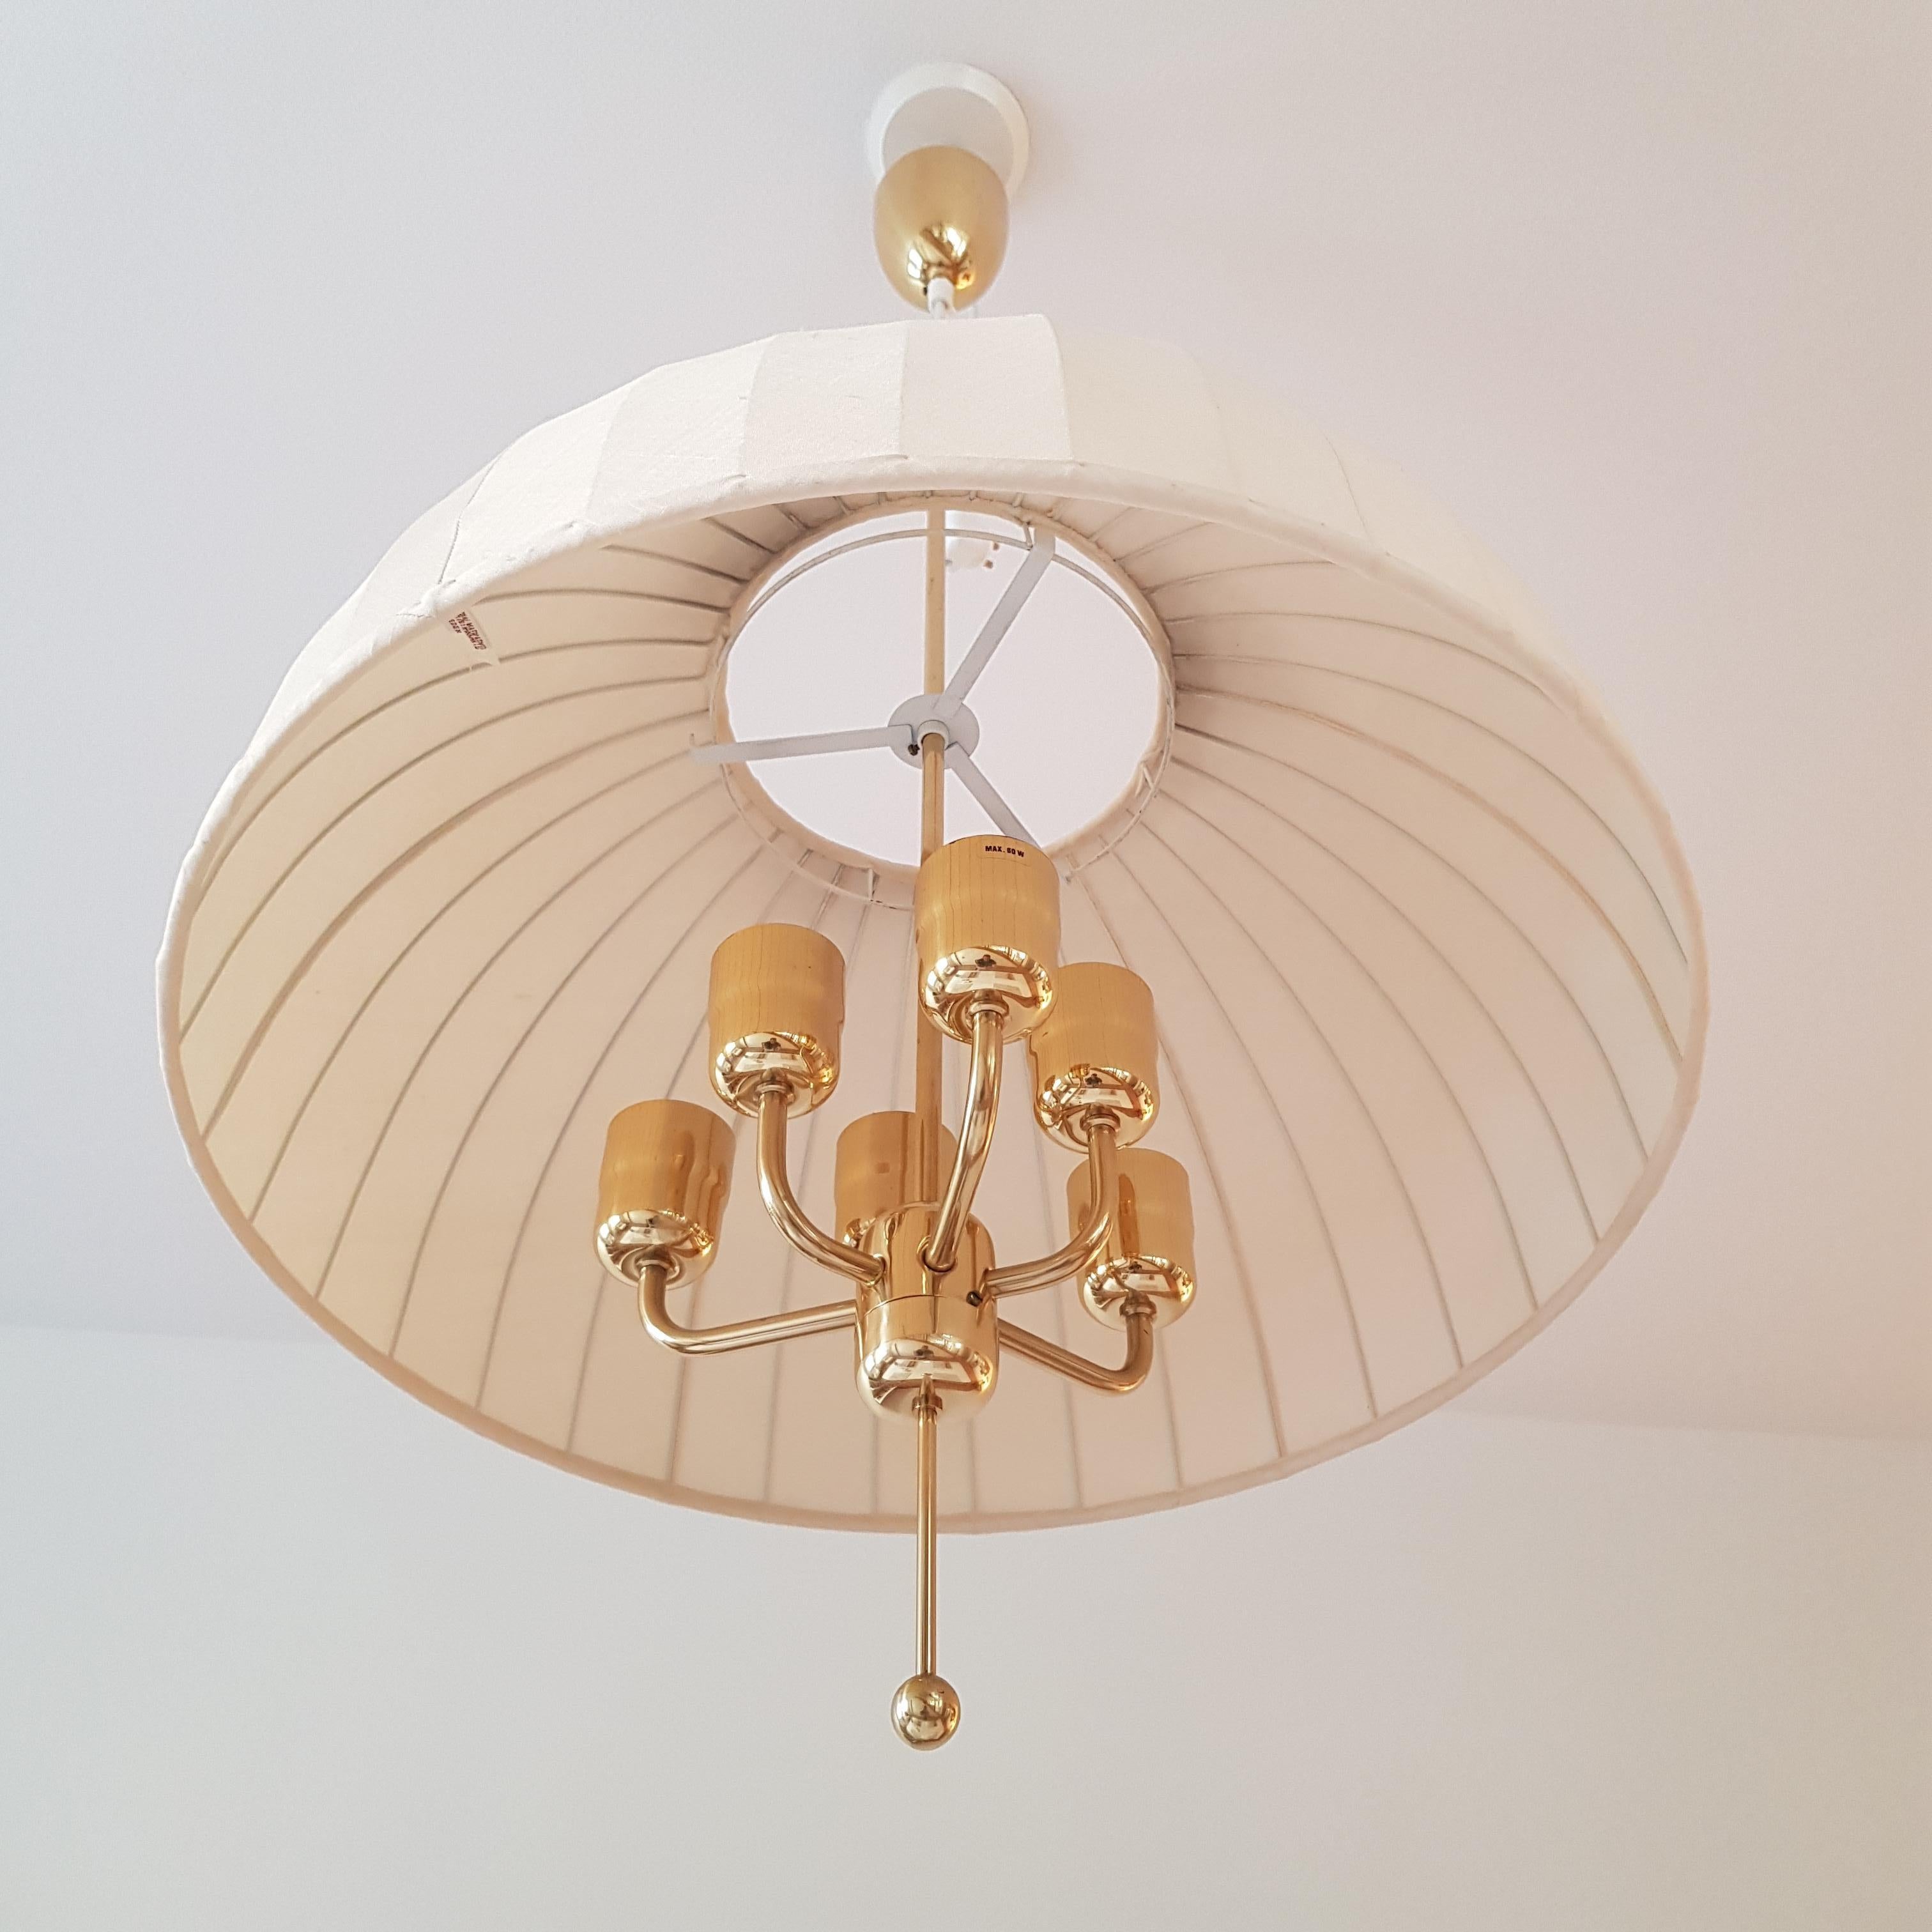 Large, six-armed Scandinavian Modern pendant lamp, Model “T549/6”, designed by Hans Agne Jakobsson and produced by AB Markaryd in the 1960s. Frame in brass and the shade in the original off-white fabric.

Original labels intact on both the ceiling